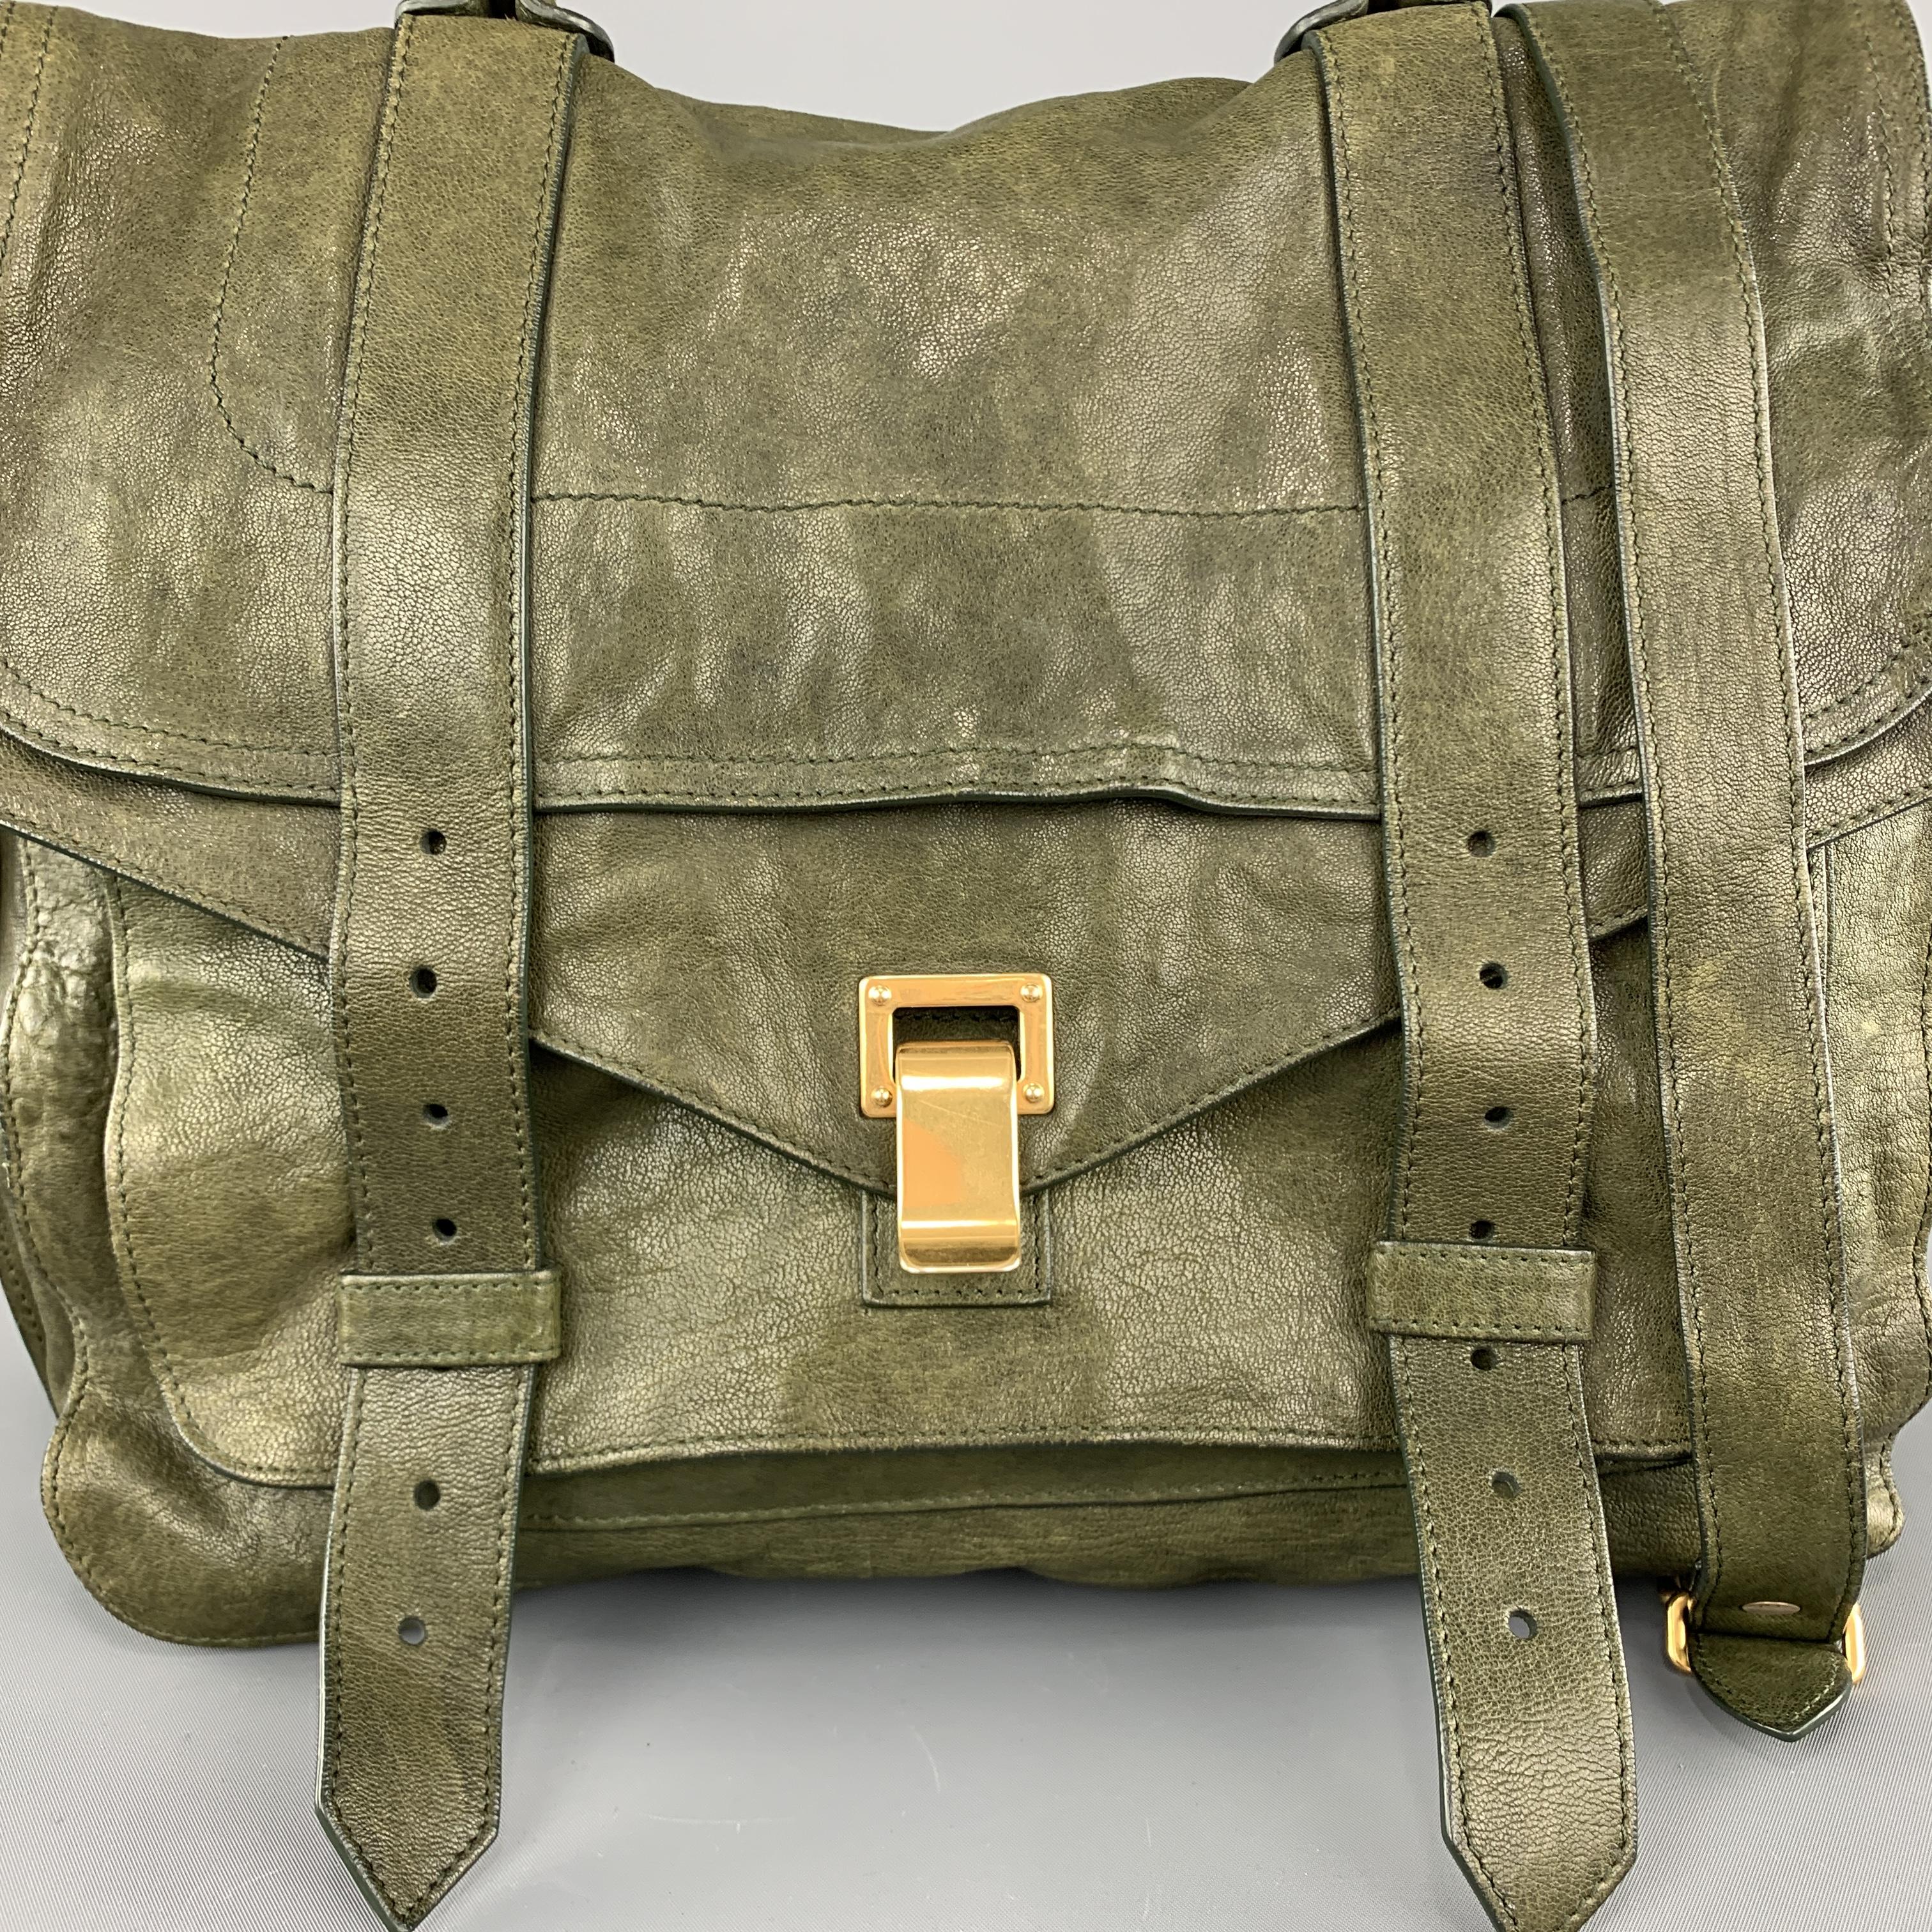 PROENZA SCHOULER PS1 satchel bag comes in olive green textured leather with a flap front, gold tone clasp closure, top handle, back zip pocket, and detachable crossbody strap. Made in Italy.

Good Pre-Owned Condition.

Measurements:

Length: 13